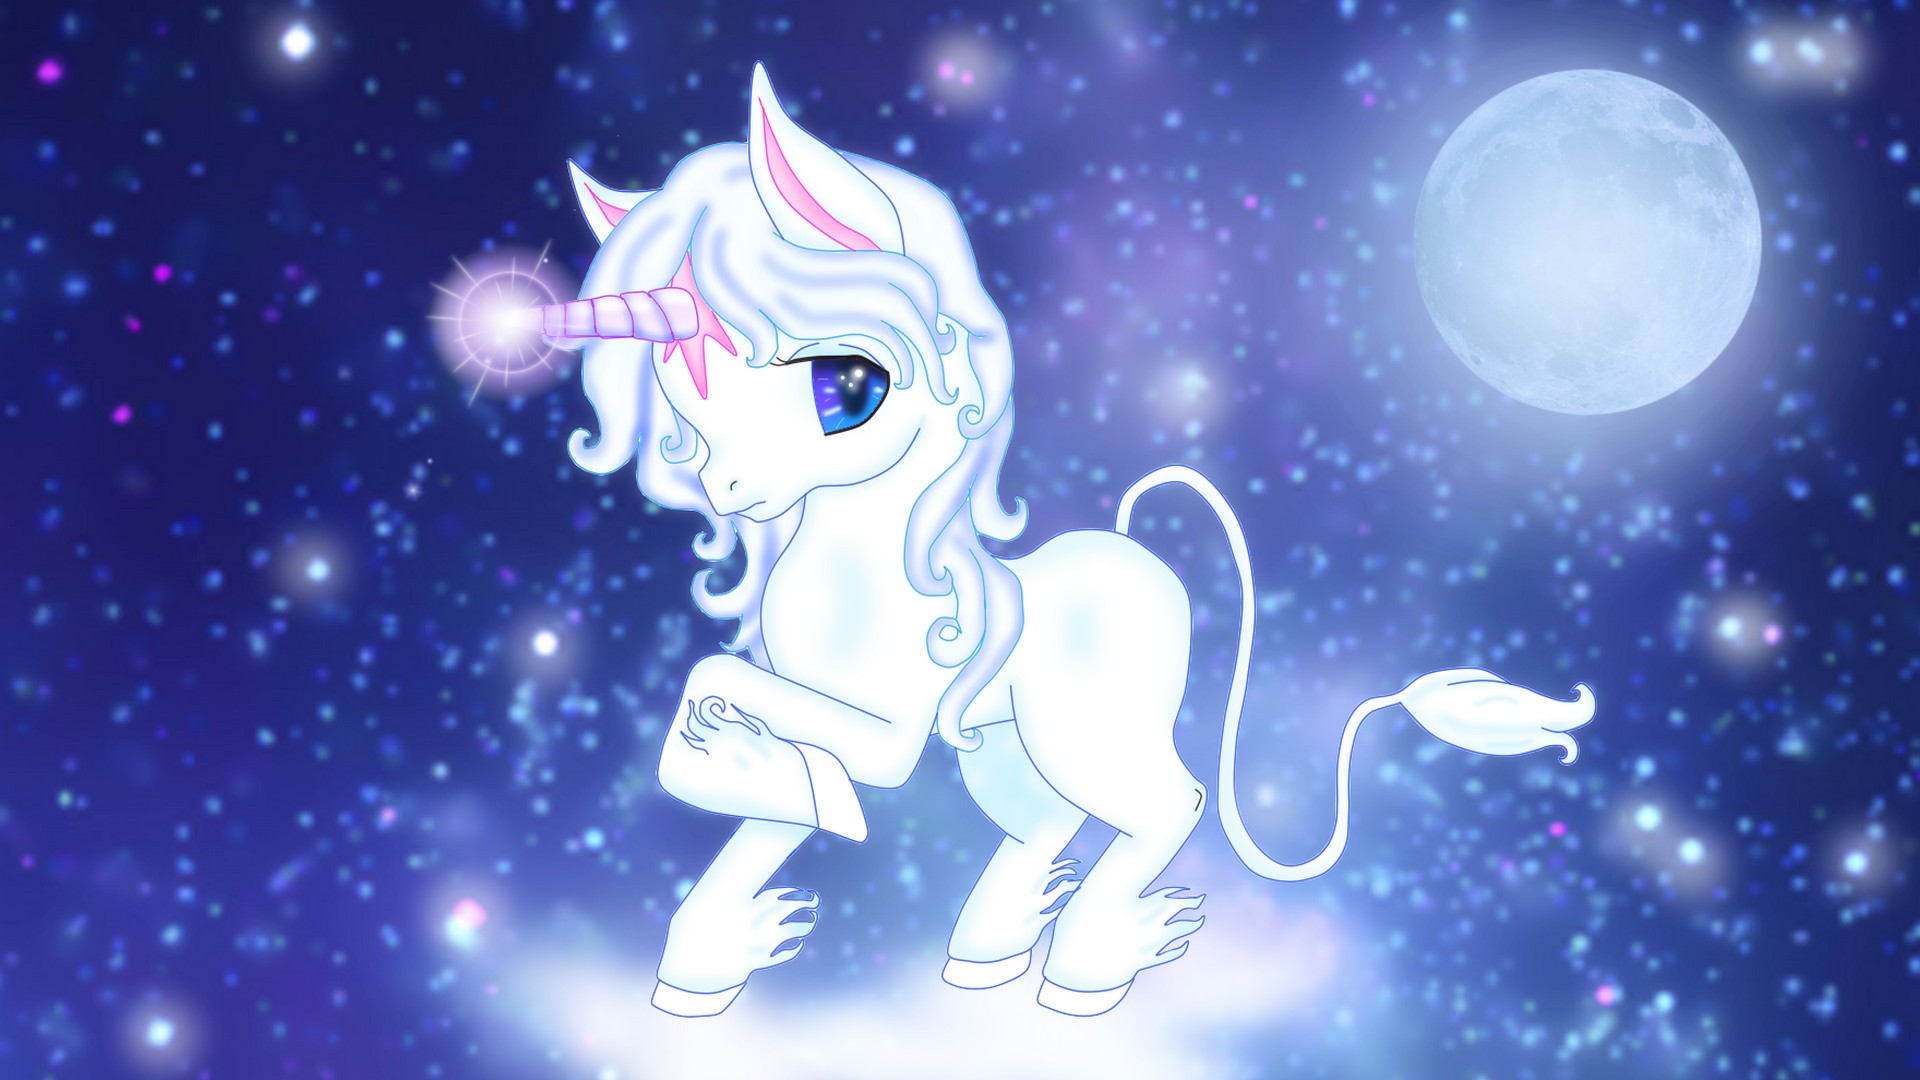 Wallpapers Computer Cute Girly Unicorn with high-resolution 1920x1080 pixel. You can use this wallpaper for your Desktop Computer Backgrounds, Mac Wallpapers, Android Lock screen or iPhone Screensavers and another smartphone device